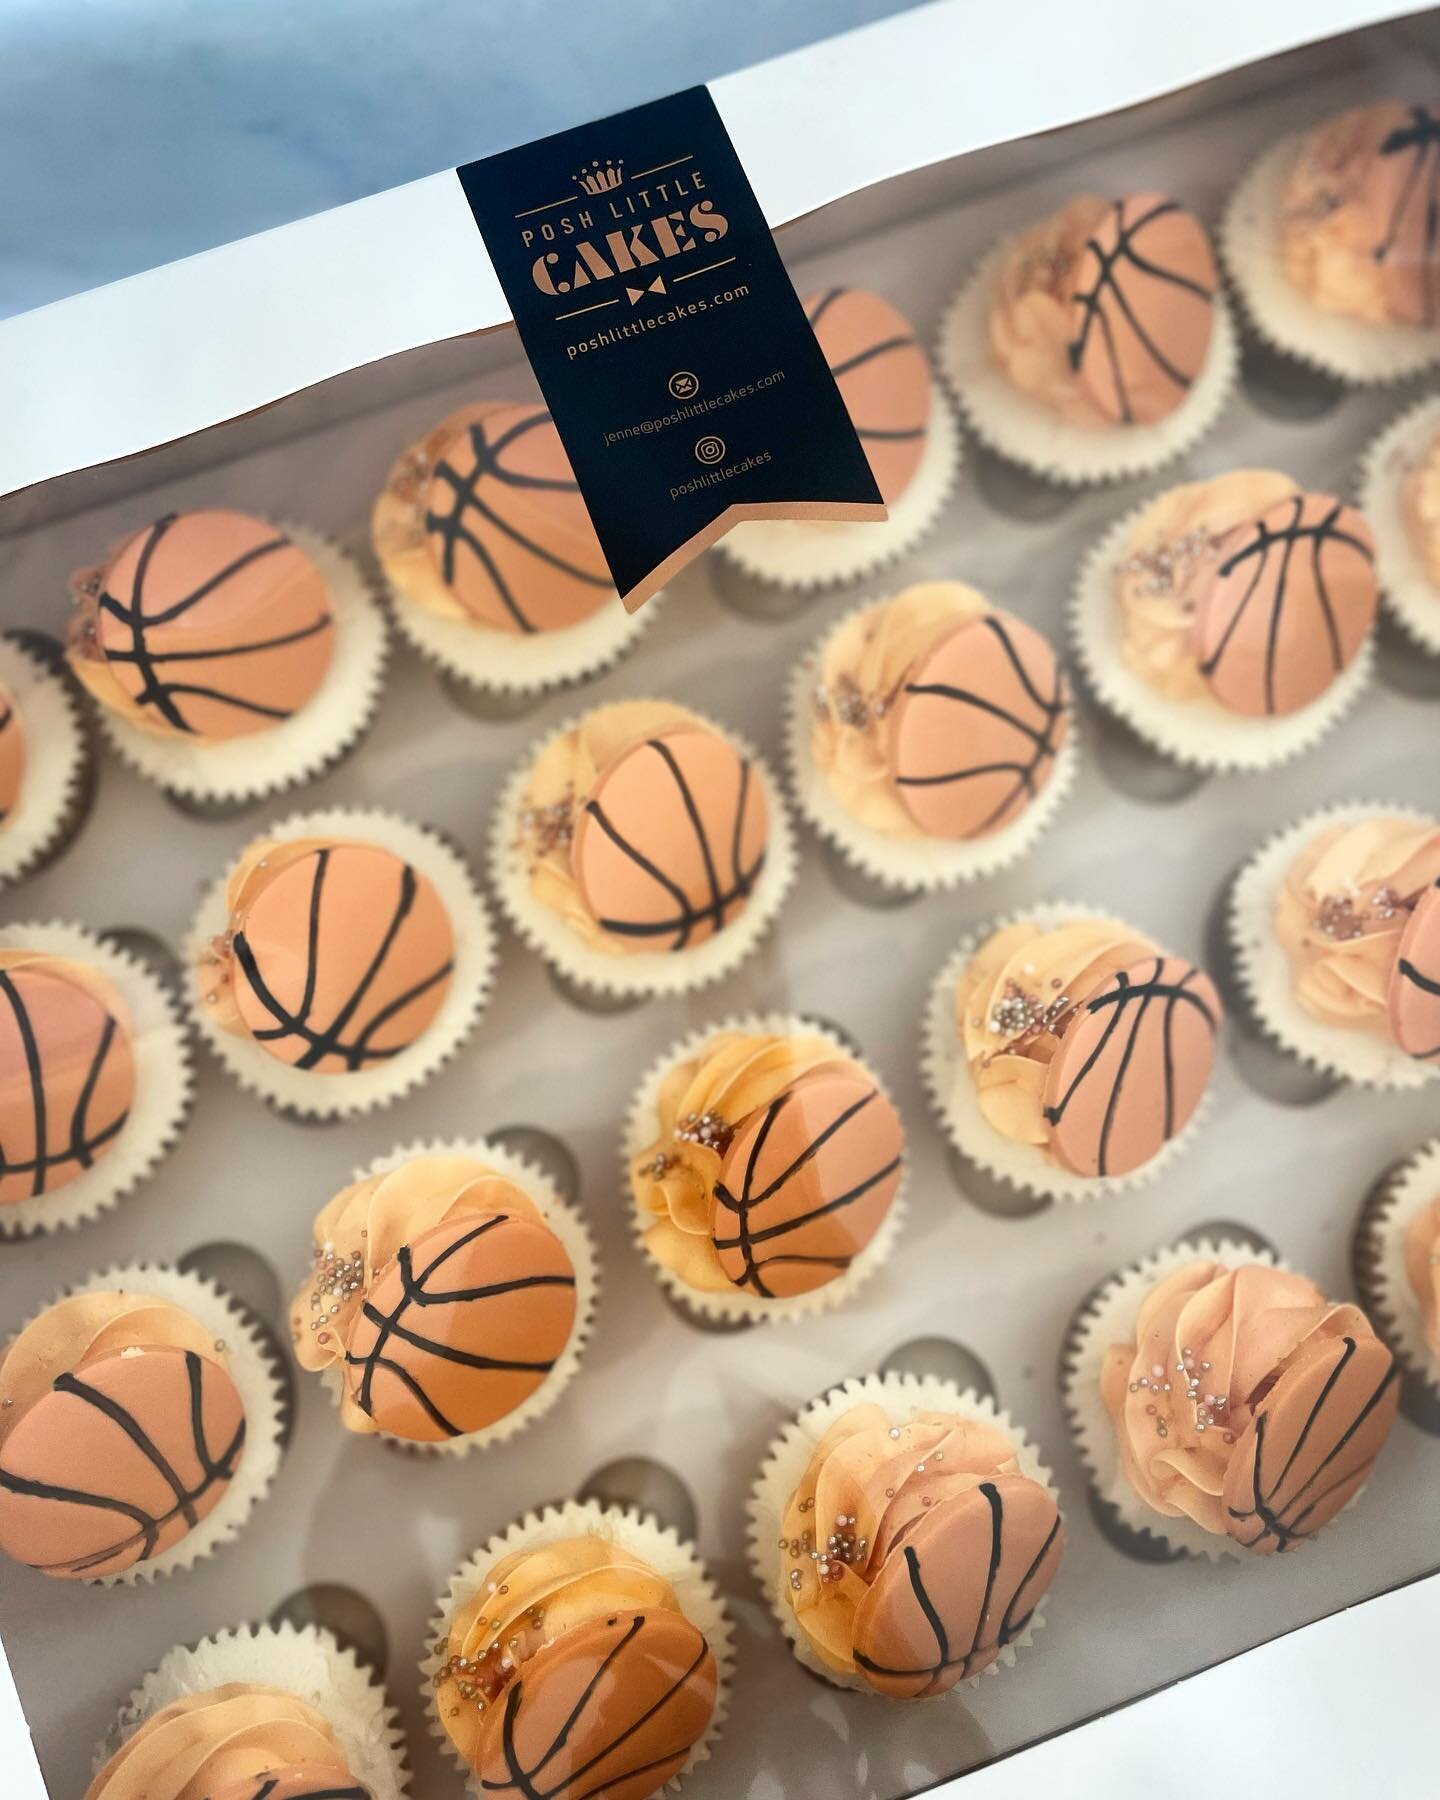 Matching basketball 🏀 deluxe cupcakes #perthcupcakes